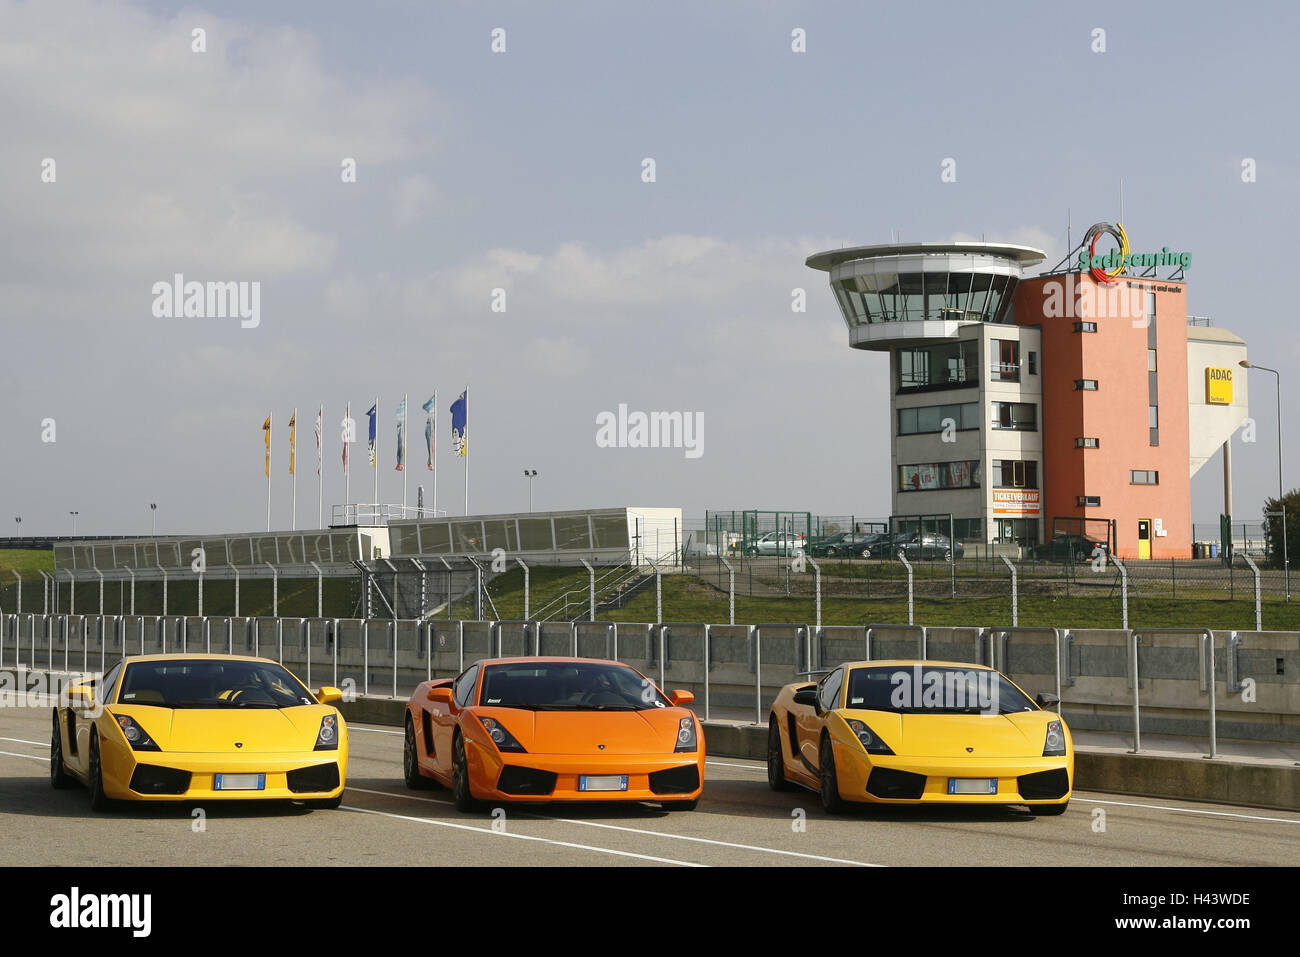 Saxon's ring, race track, Lamborghinis, Germany, 3rd formation, cars, outside, Driving Days, three, Lamborghini, luxury, luxury cars, sports cars, nobly, exclusively, yellow, orange, different colour, stand, side by side, lined up, Stock Photo